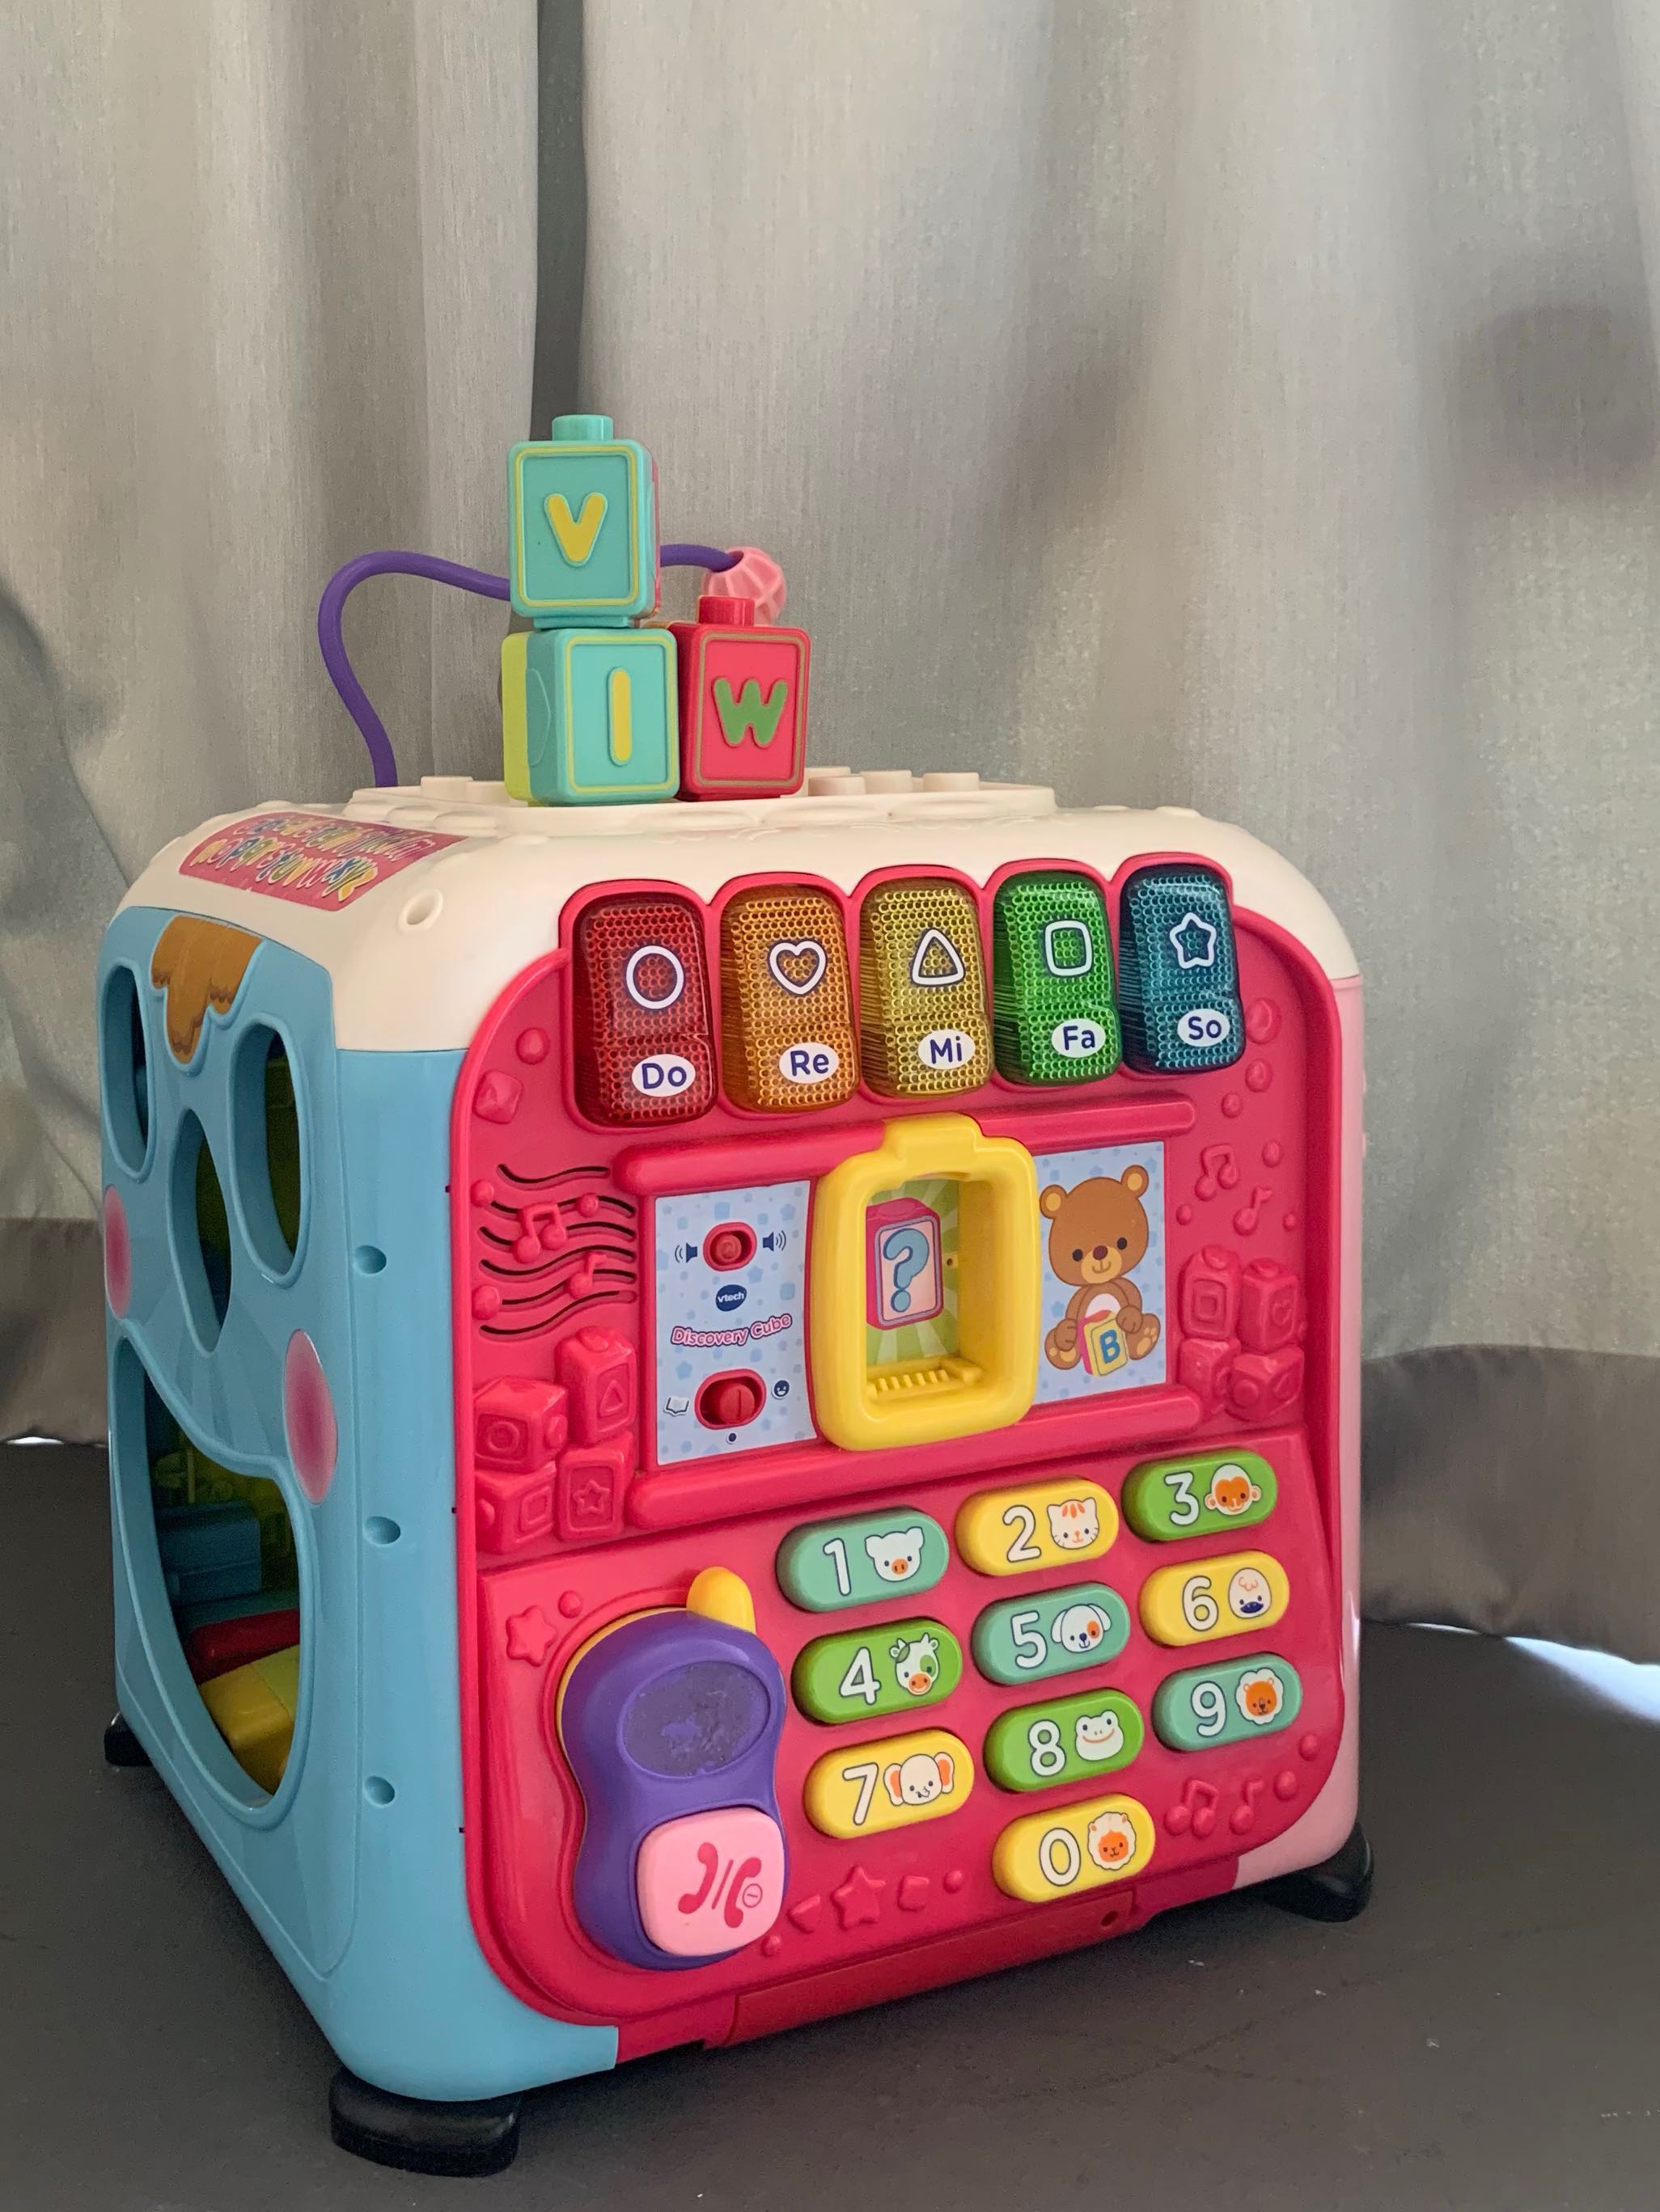 vtech baby discovery cube